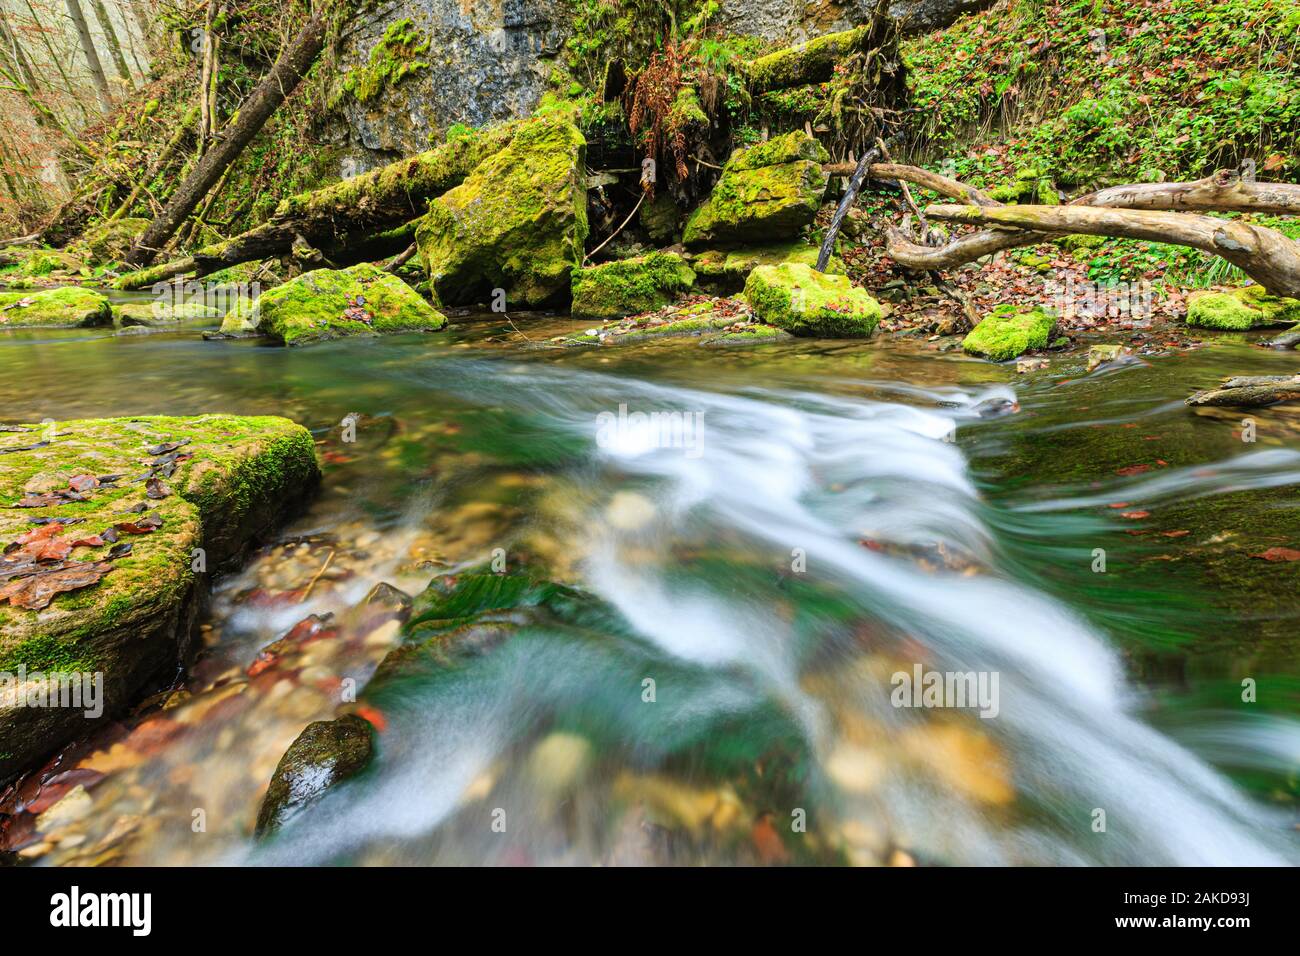 River Gauchach in the Gauchach Gorge, Black Forest, Baden-Wuerttemberg, Germany Stock Photo